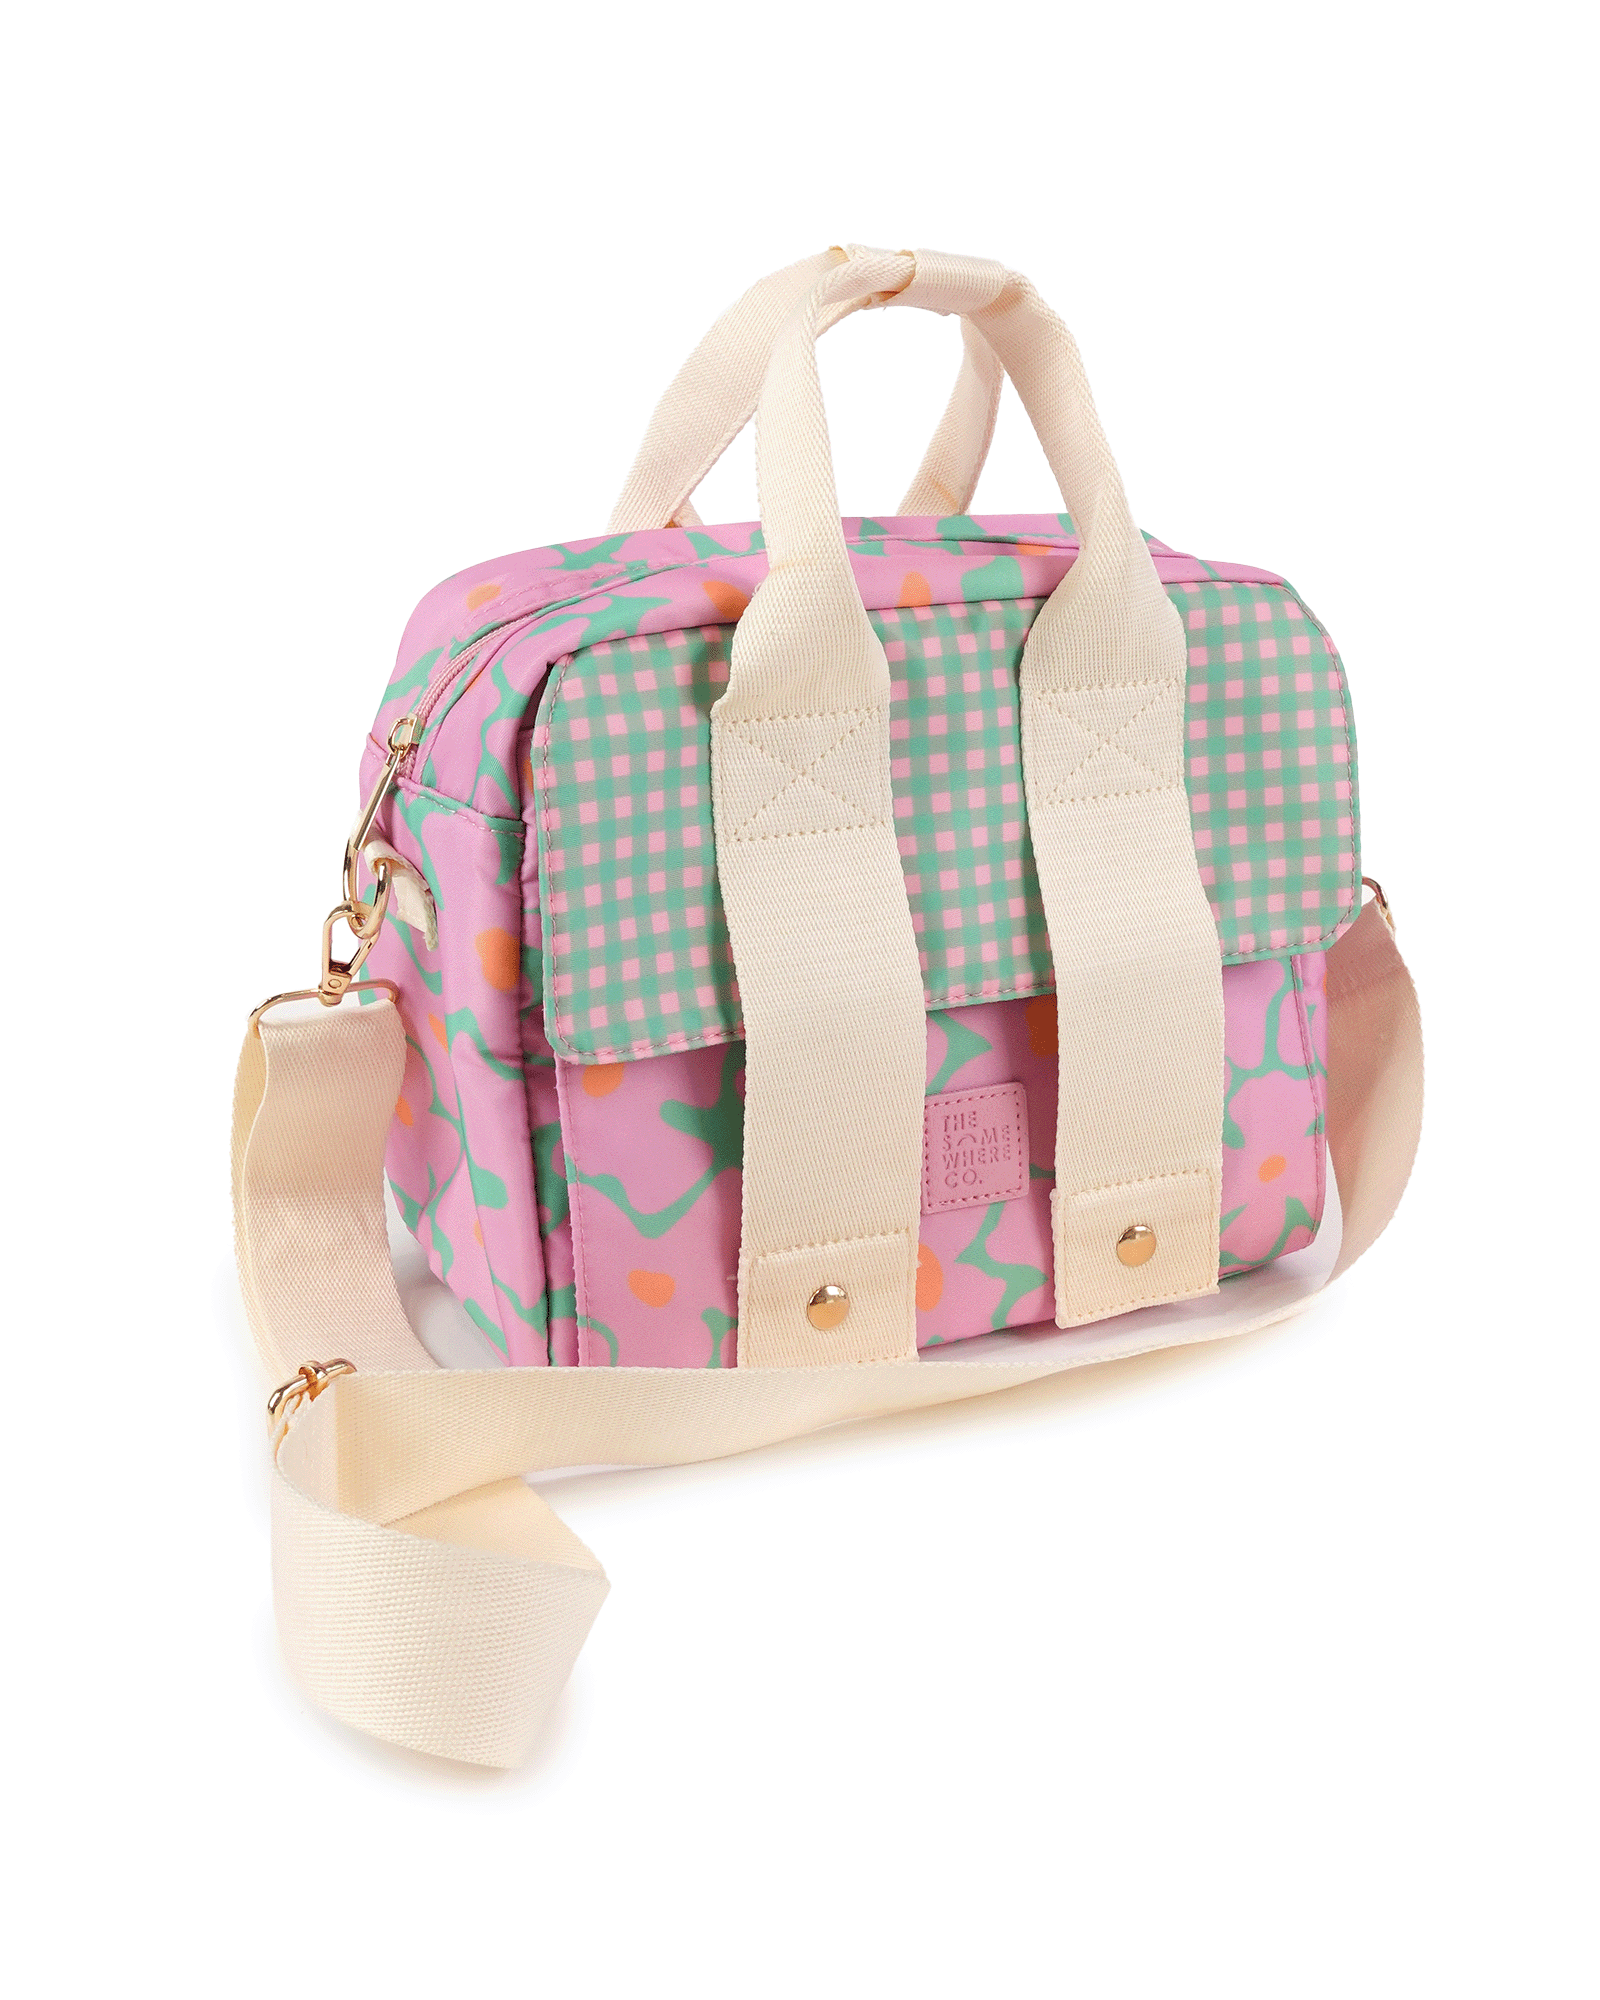 Blossom Lunch Tote